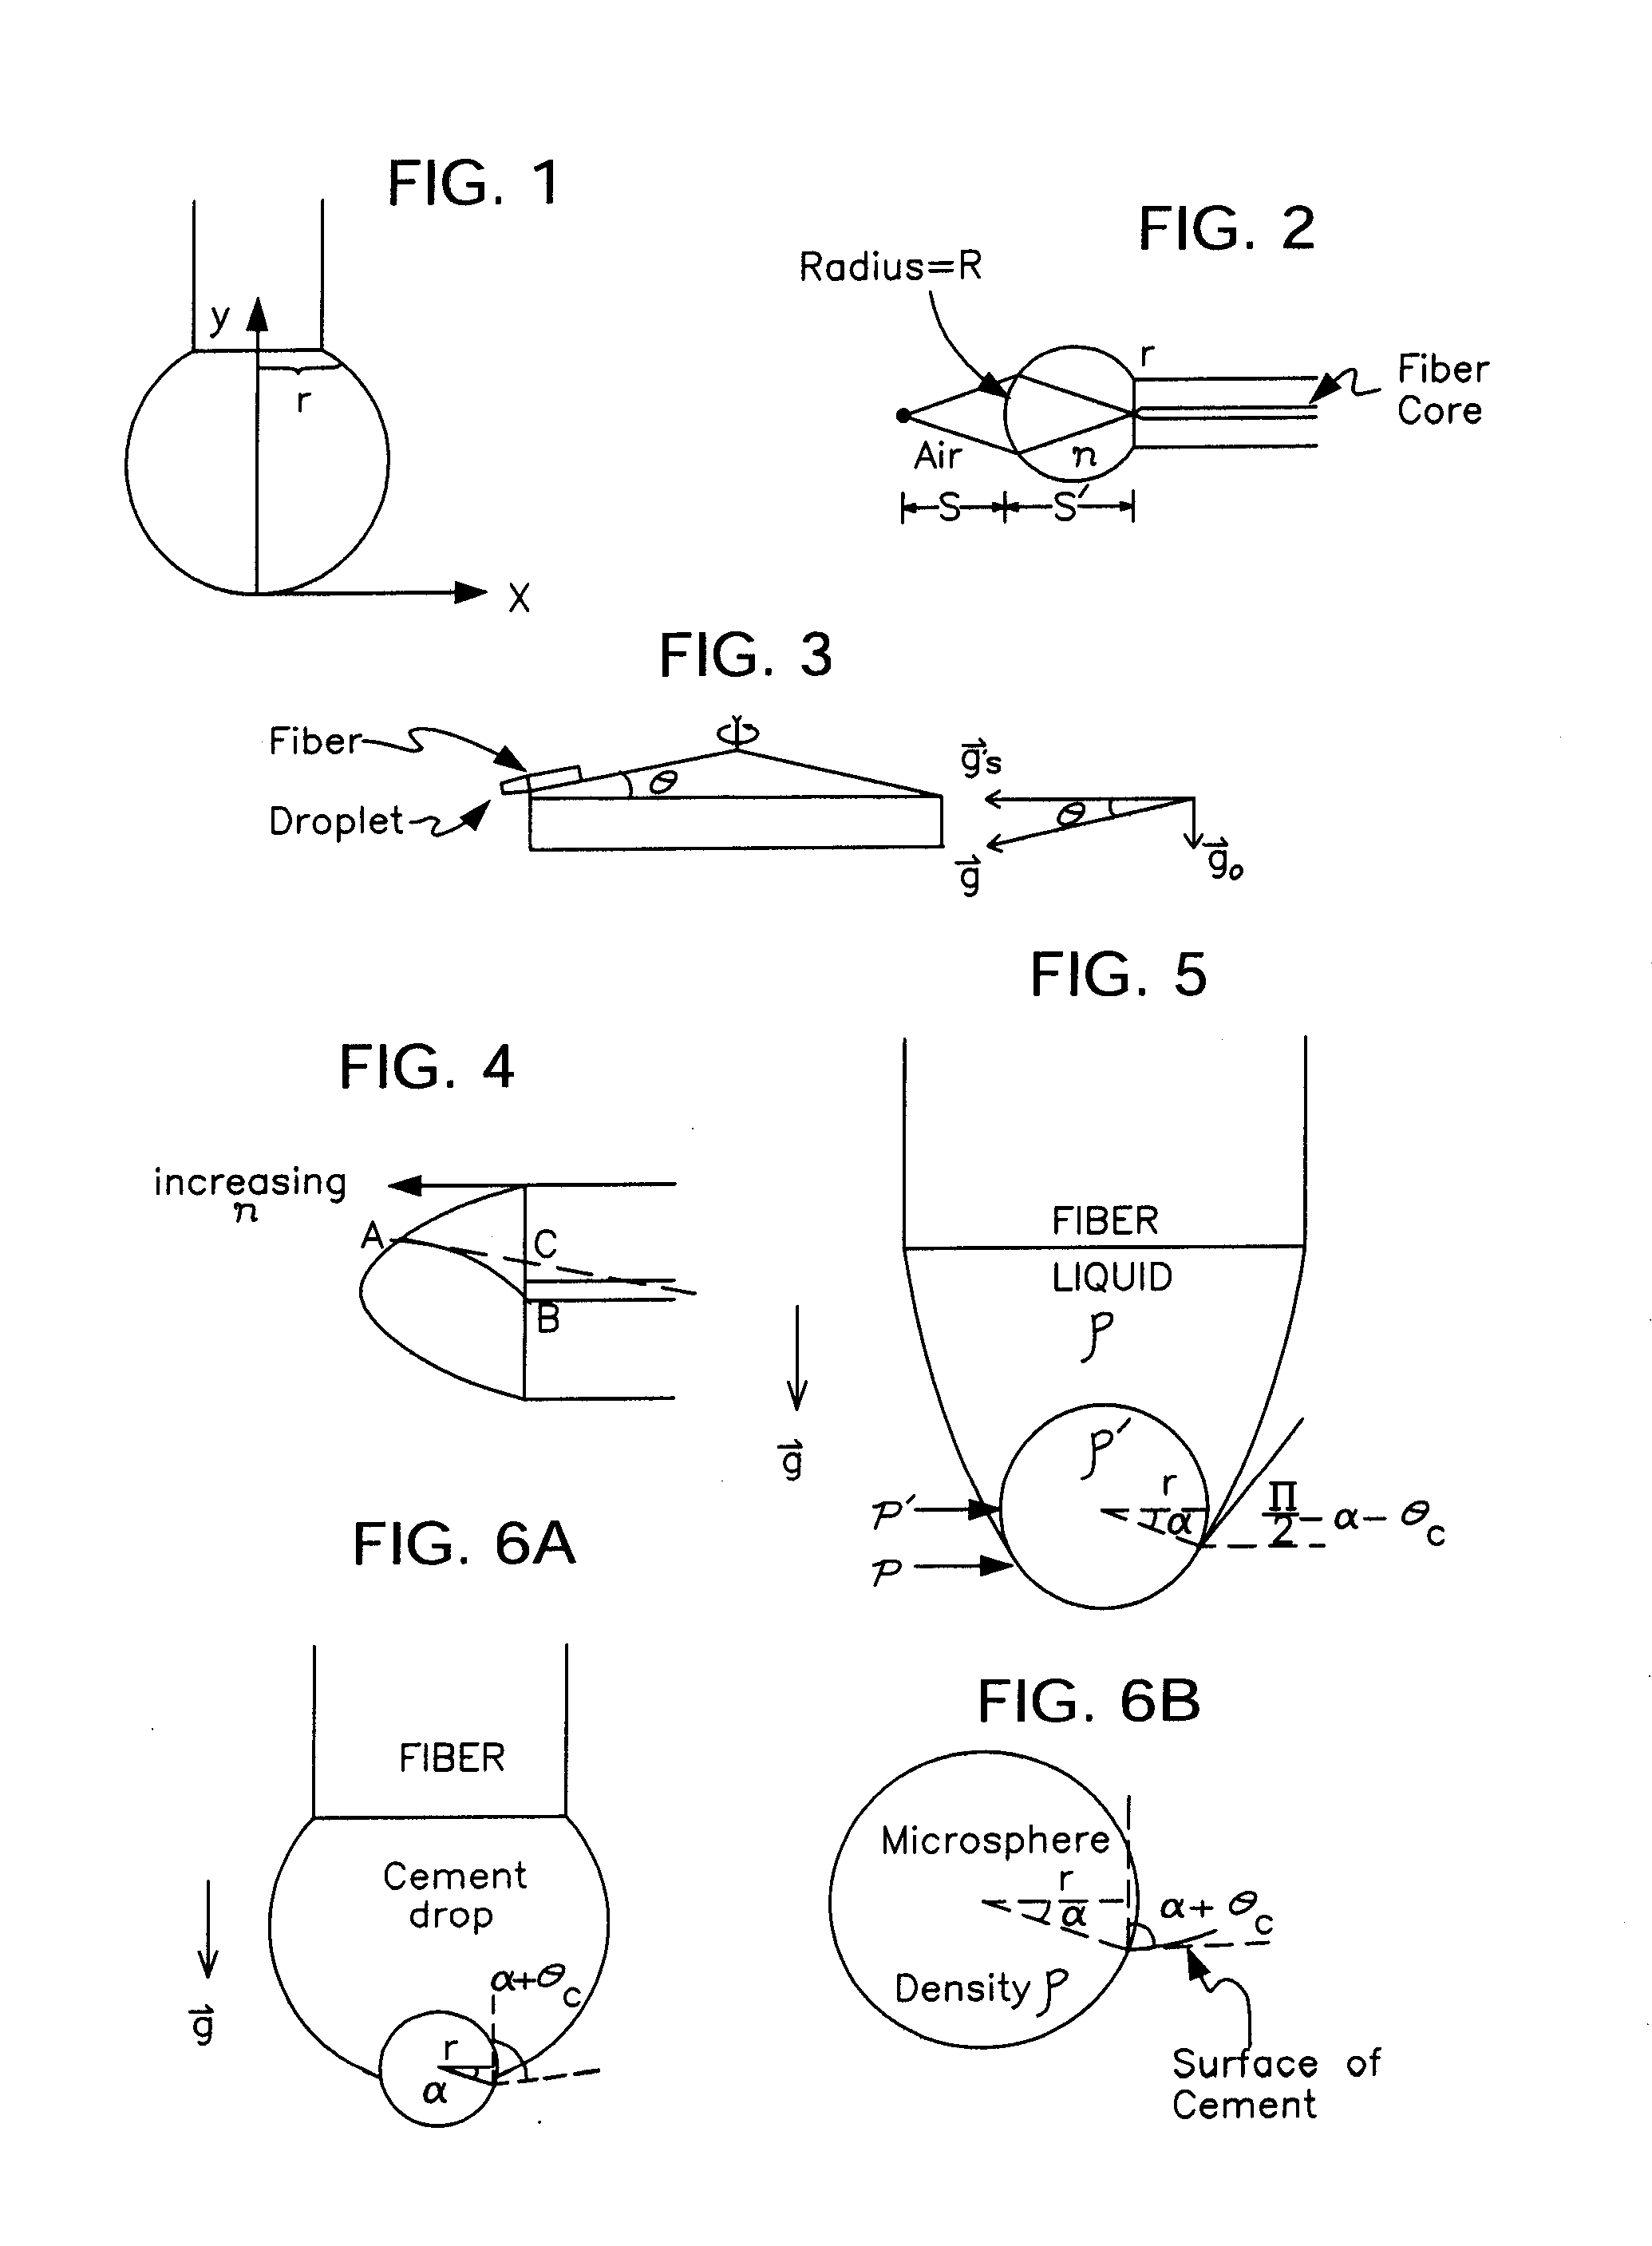 Methods for Fabricating Lenses at the End of Optical Fibers in the Far Field of the Fiber Aperture